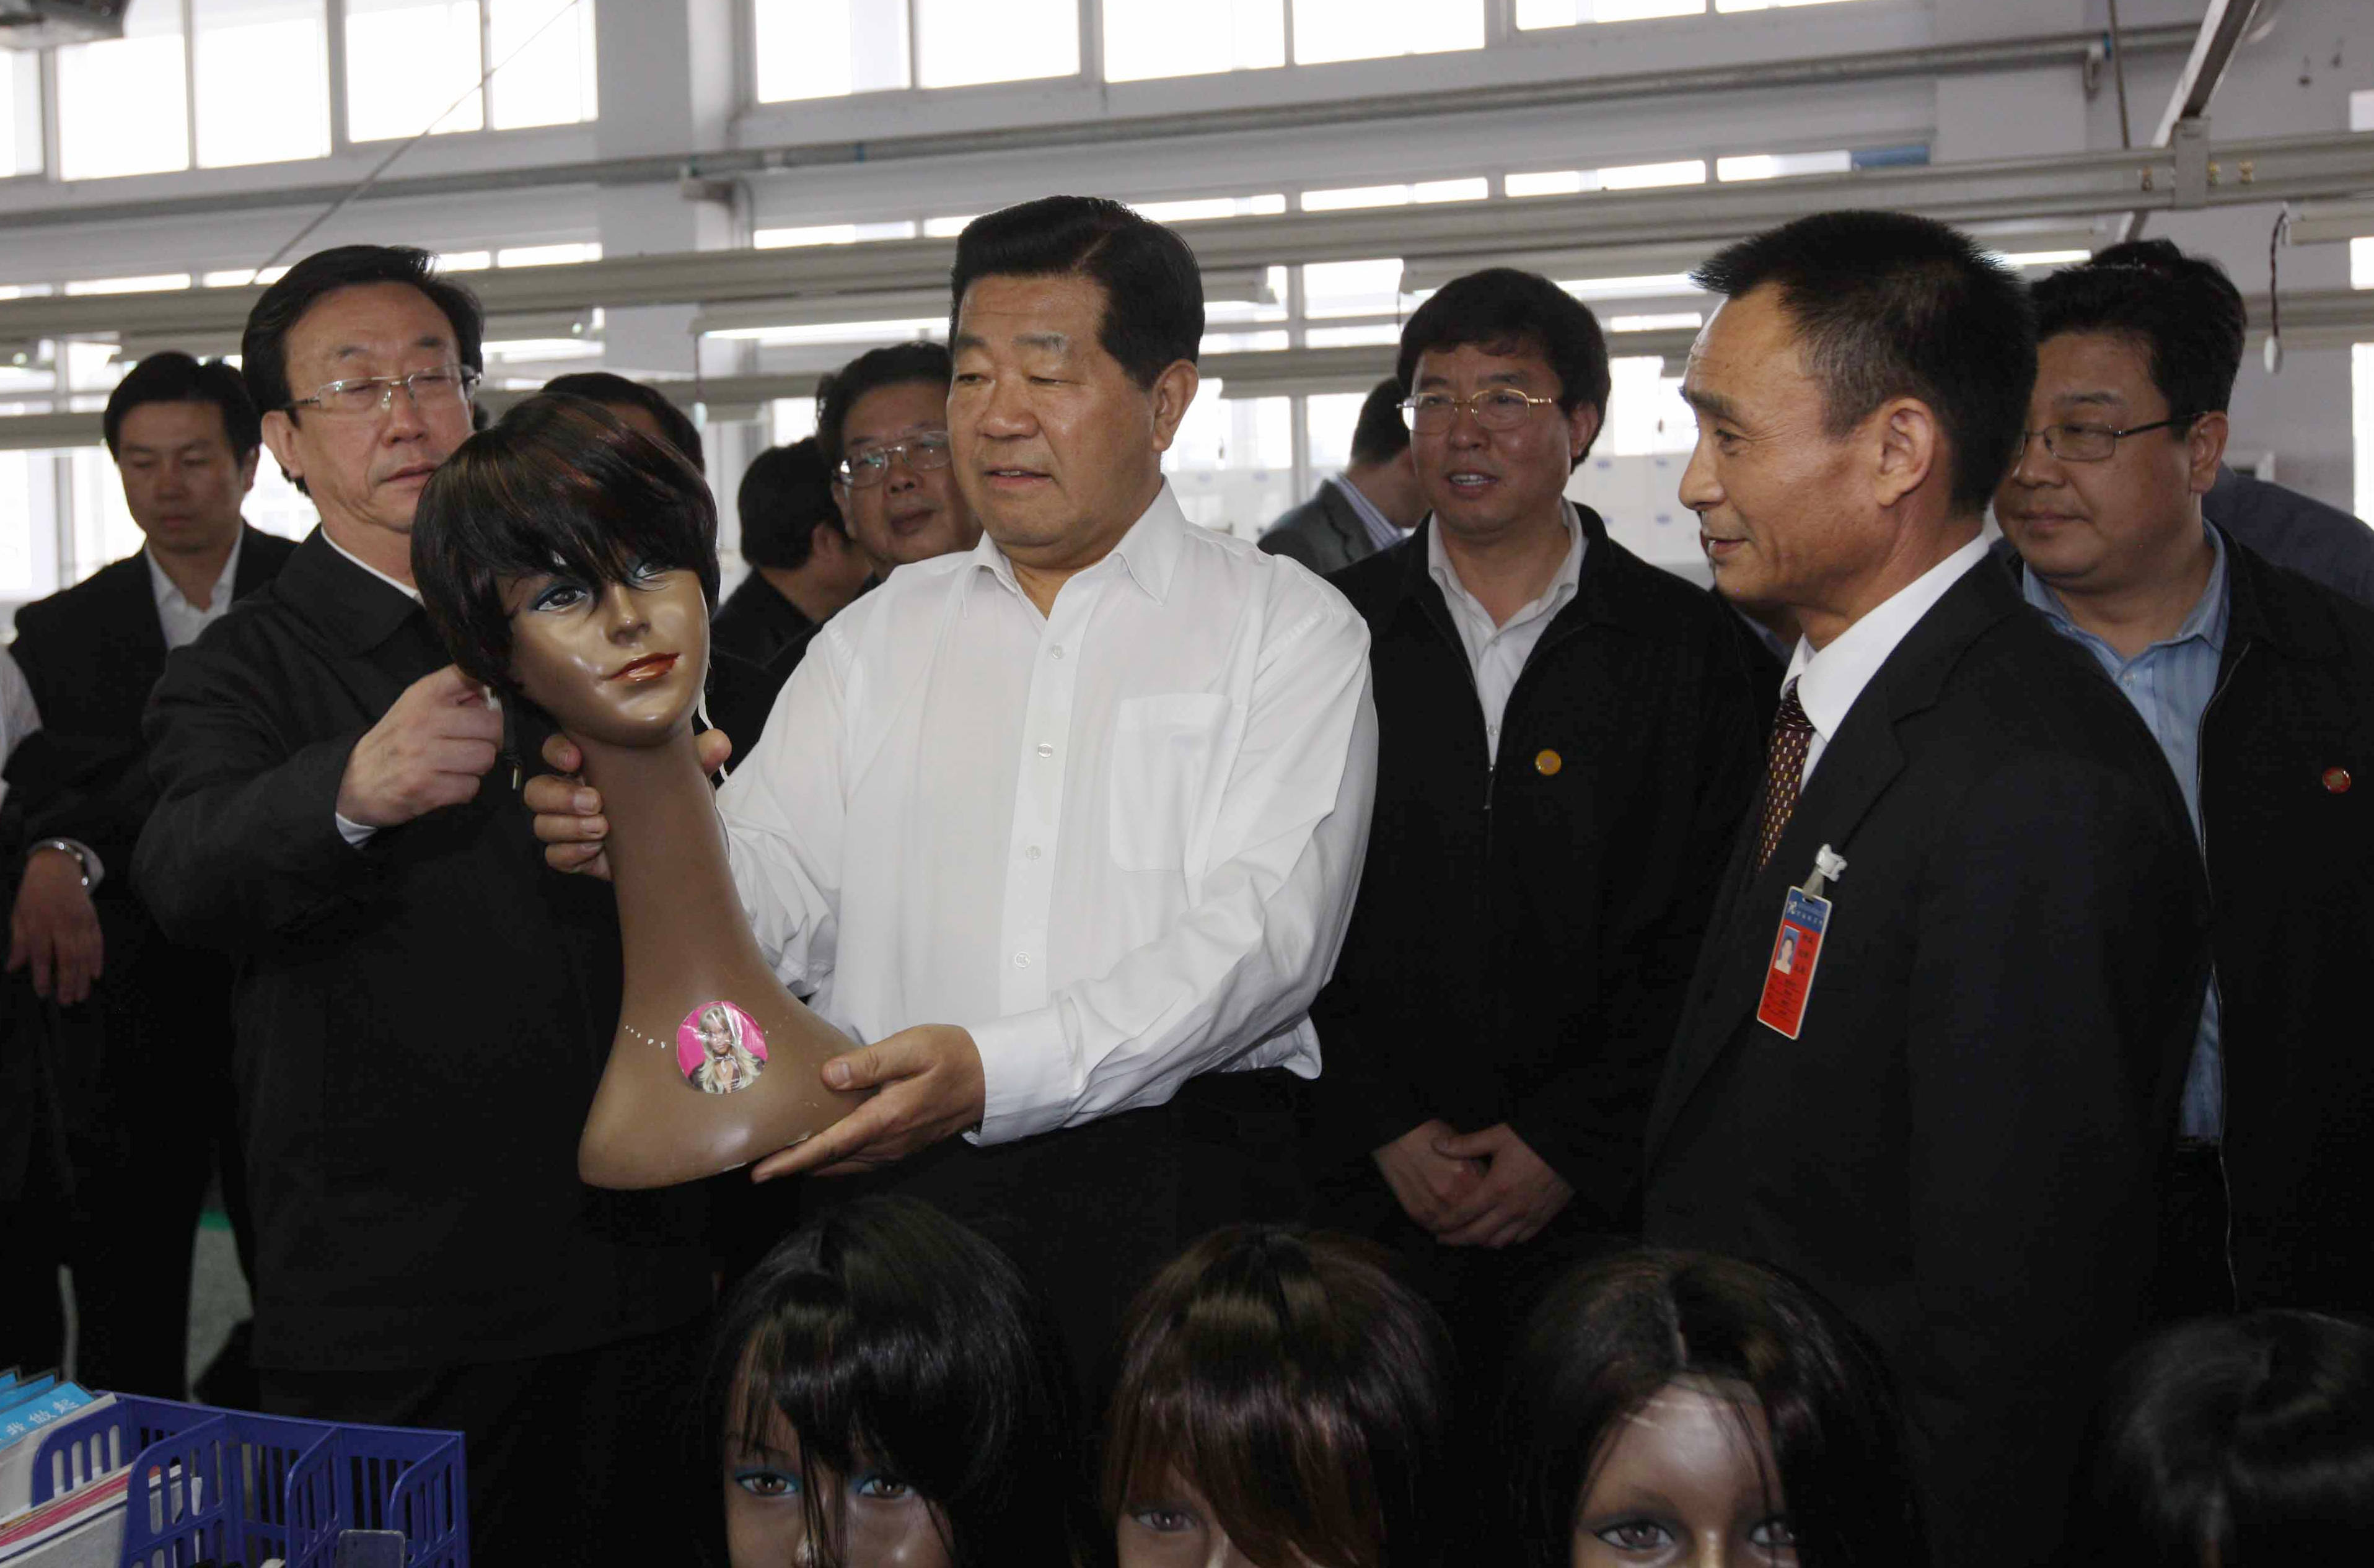 In April, 2009, the member of Standing Committee of CCCPC political bureau